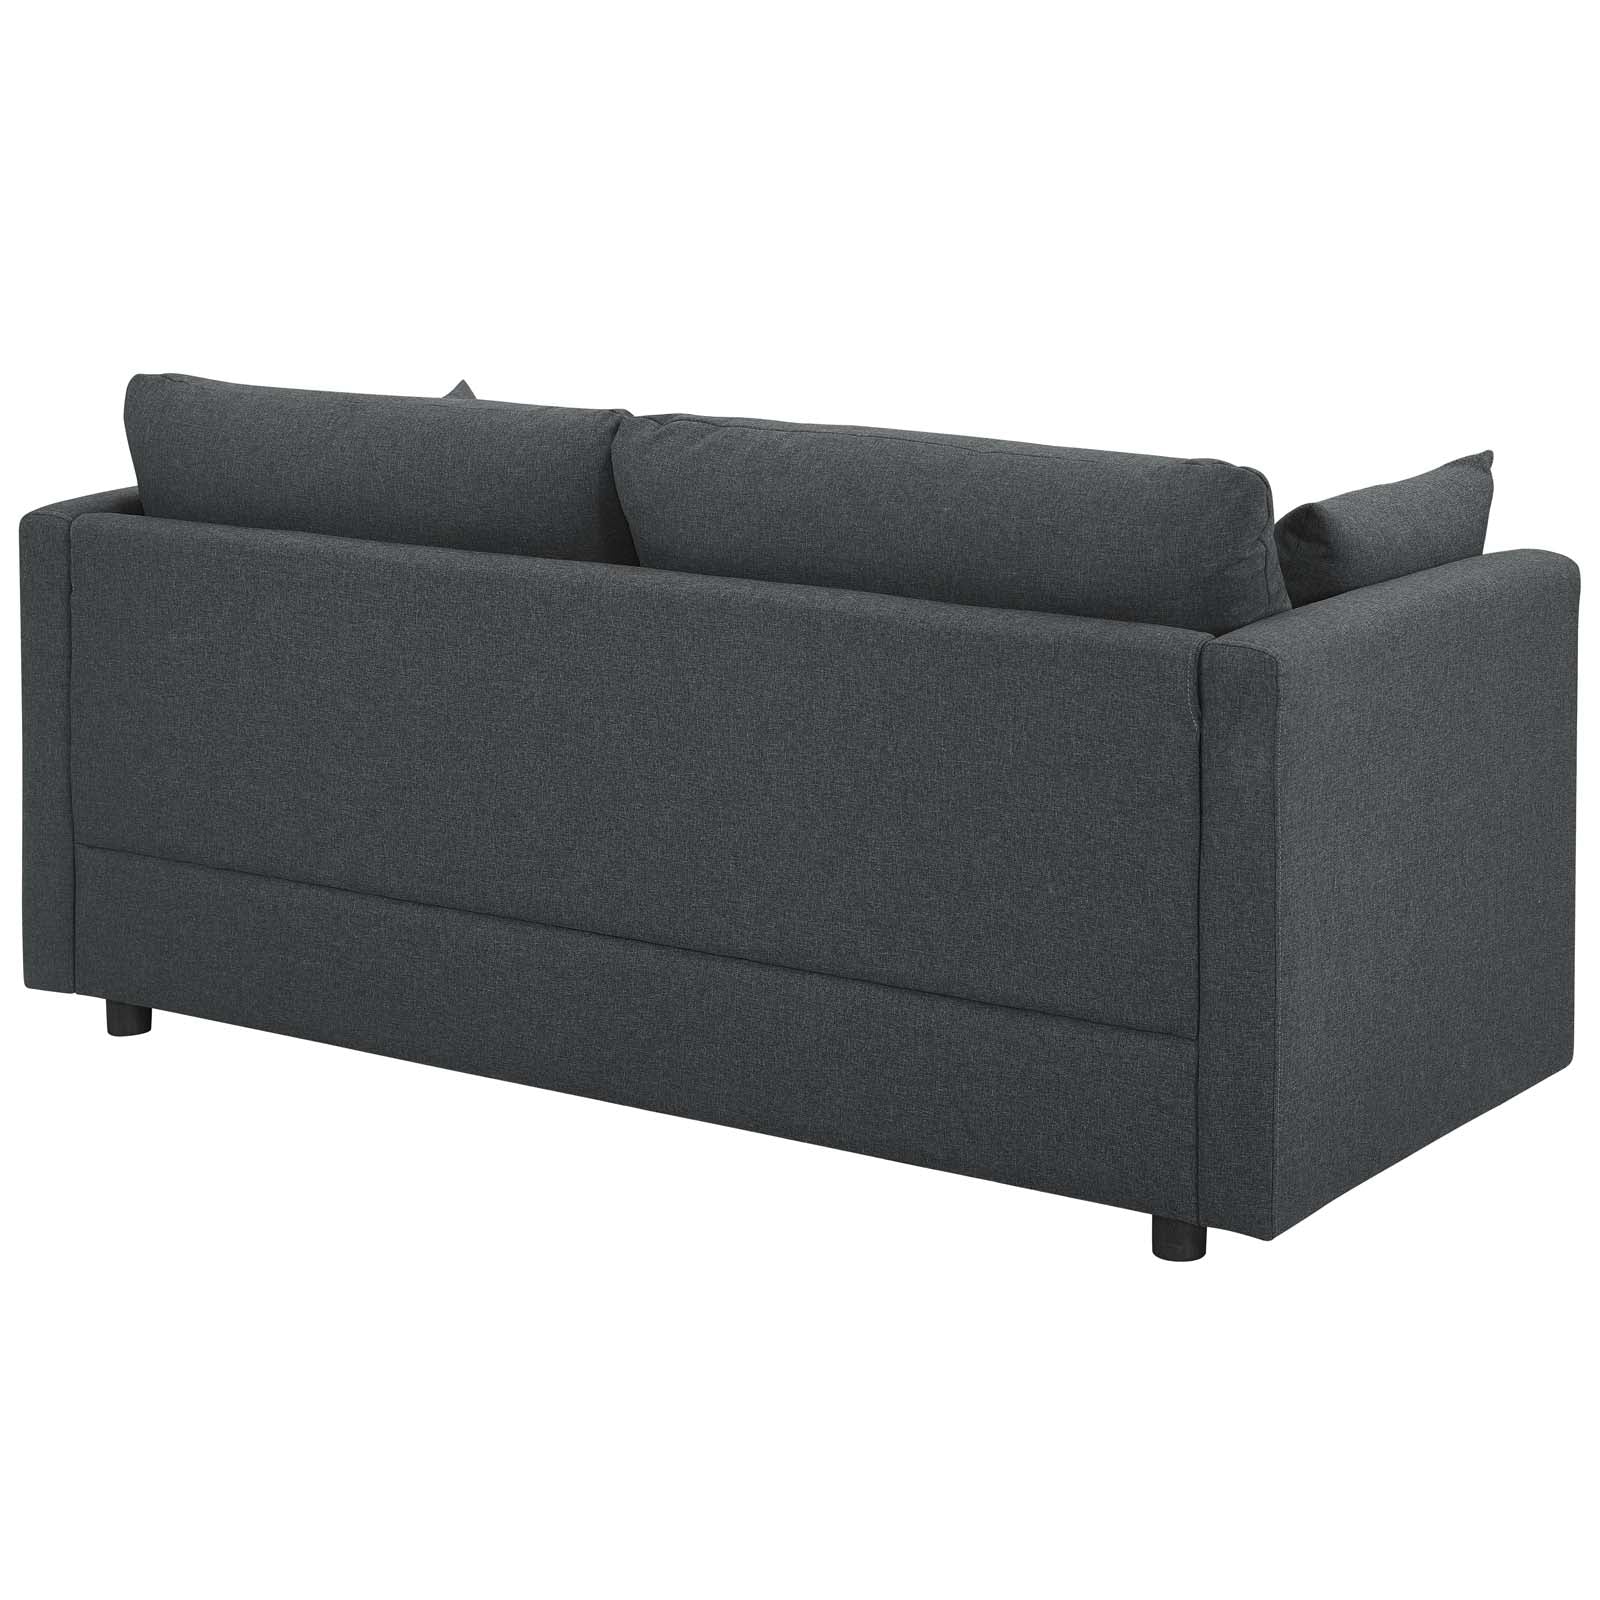 Activate Upholstered Fabric Sofa - East Shore Modern Home Furnishings